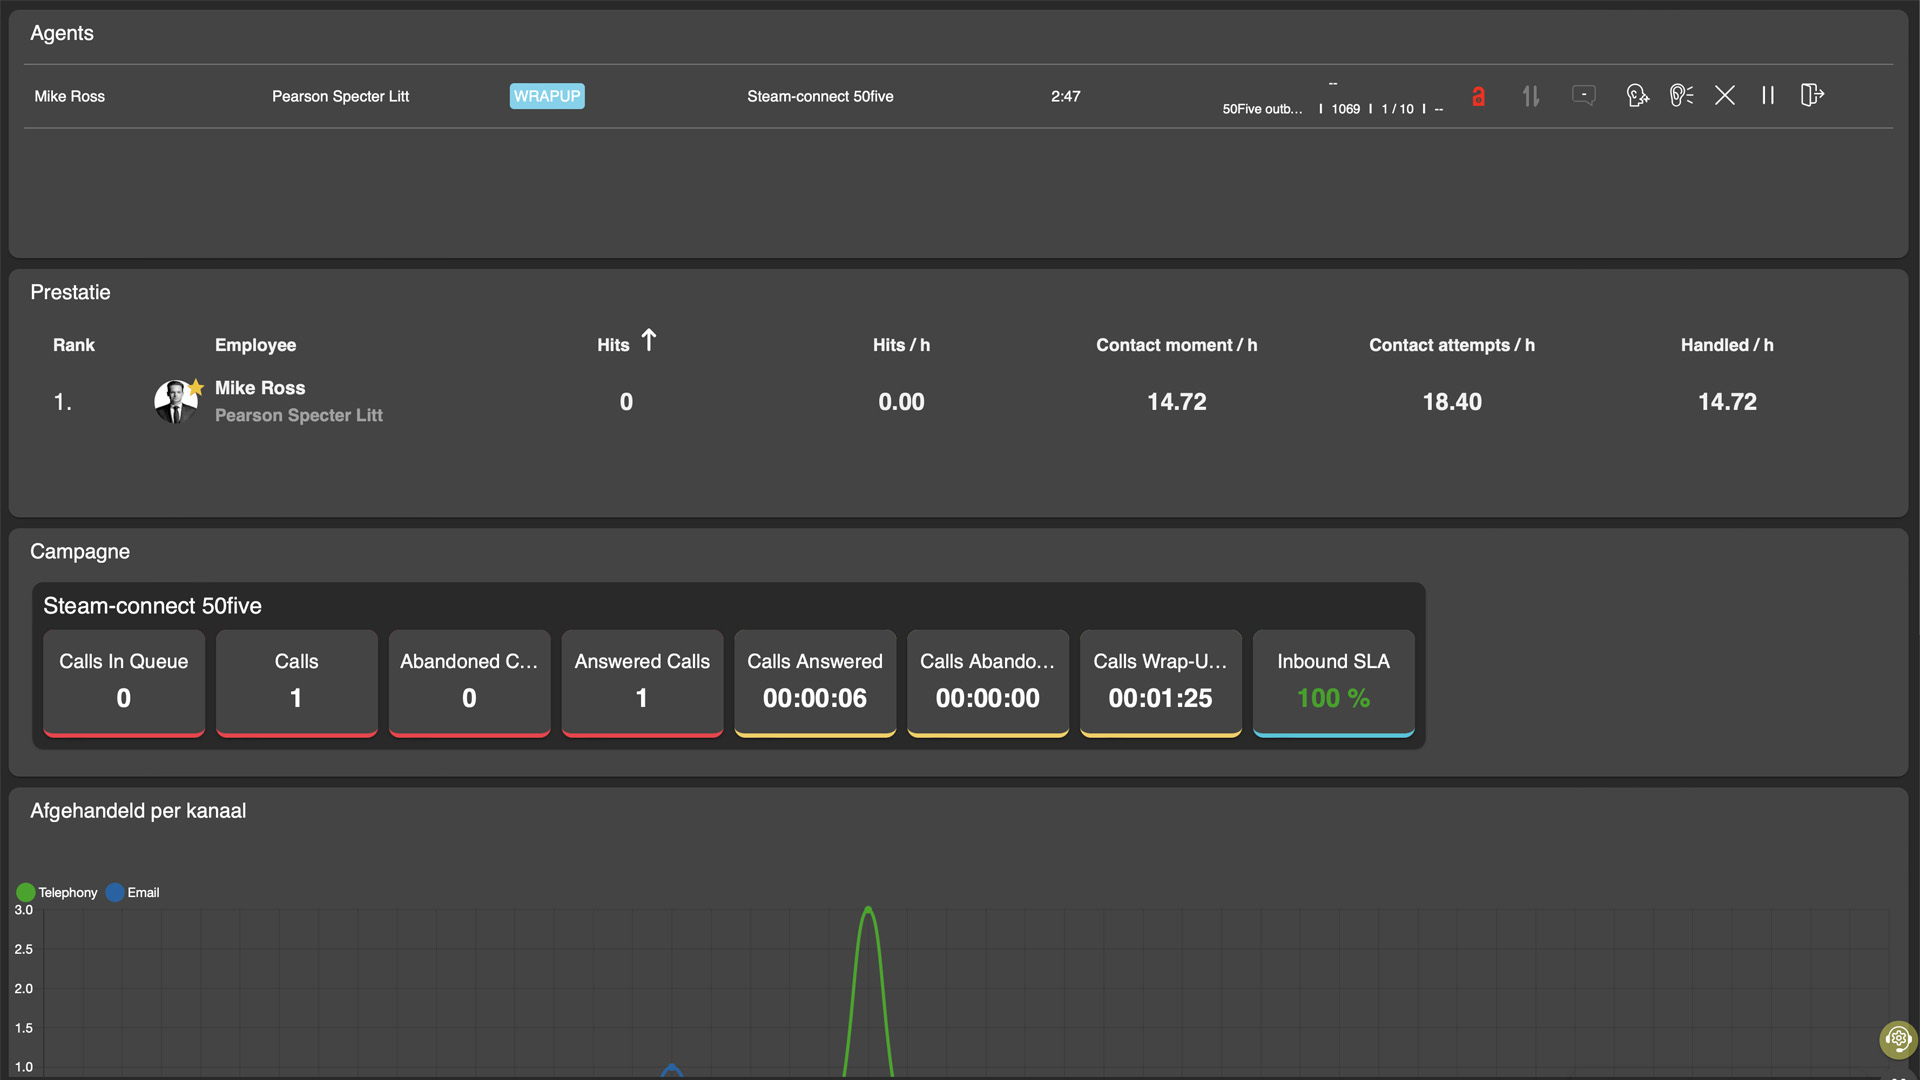 Realtime Dashboard